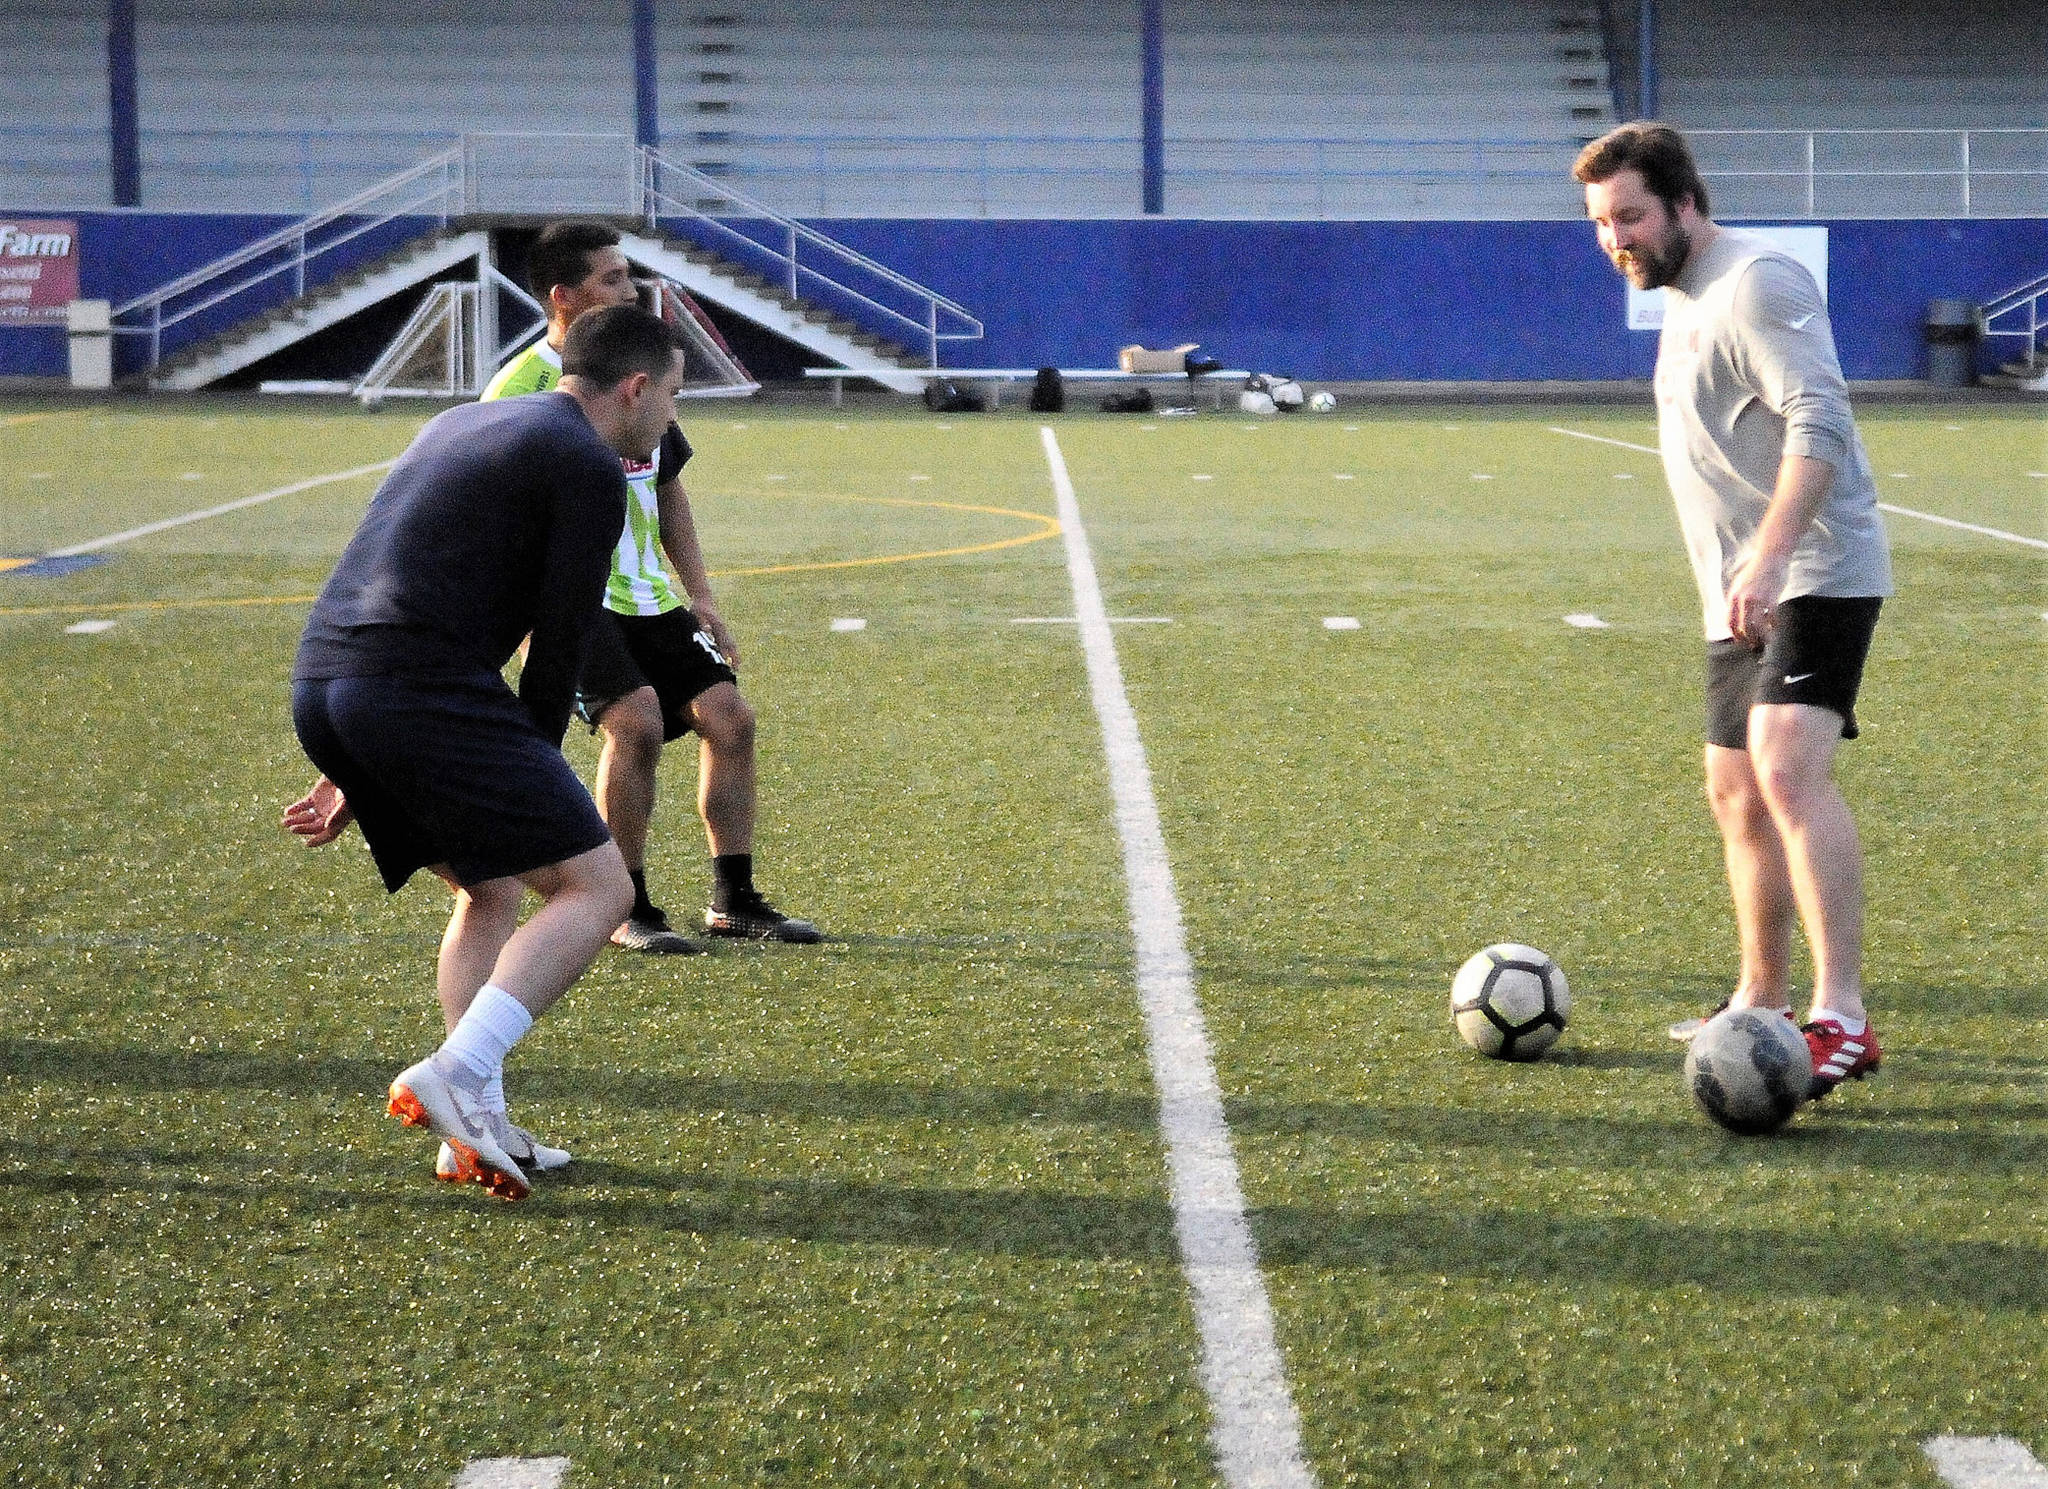 Grays Harbor Gulls head coach Drew Grannemann, right, leads players in a drill in practice on Tuesday. The Gulls are looking to avoid relegation by picking up points in the final three games of the season. (Hasani Grayson | Grays Harbor News Group)